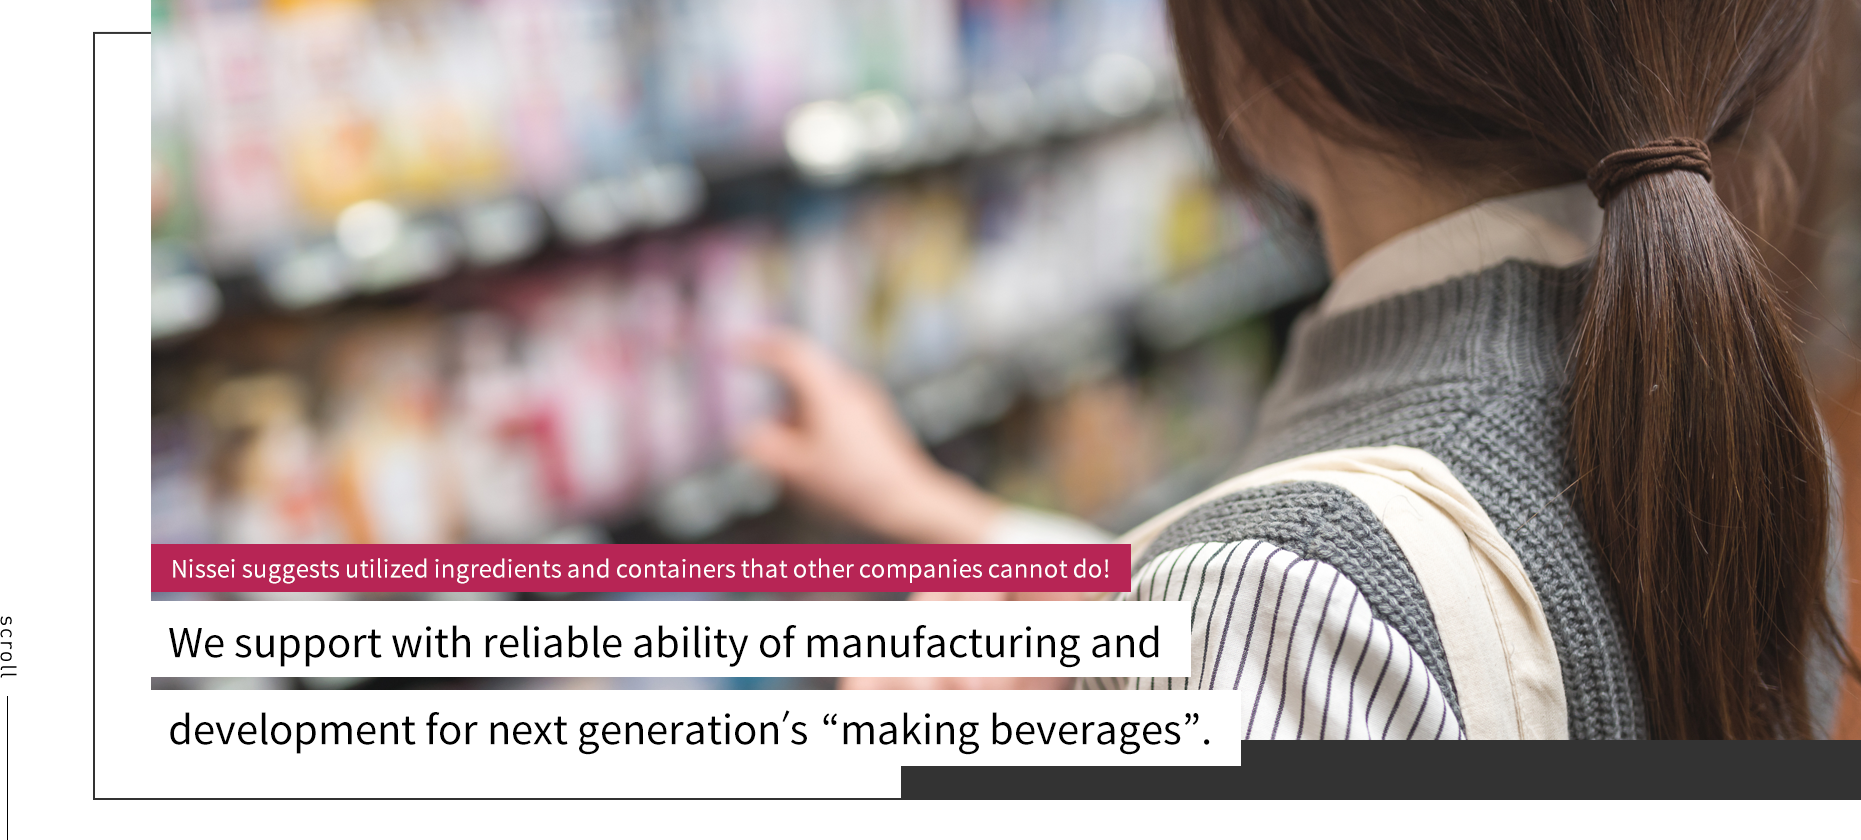 scroll Nissei suggests utilized ingredients and containers that other companies cannot do! We support with reliable ability of manufacturing and development for next generation’s “making beverages”.